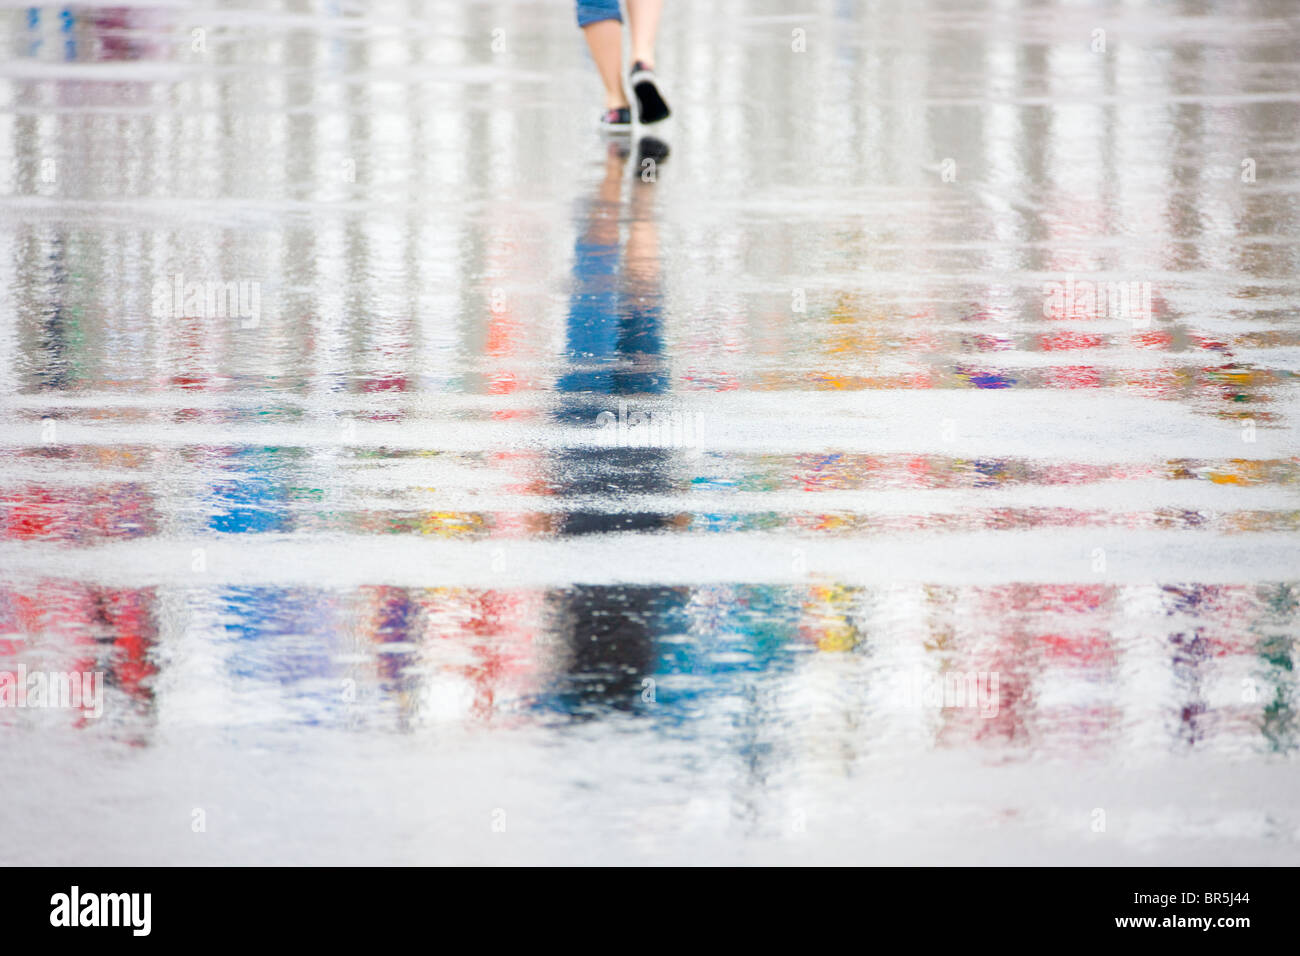 Reflection of people and flag poles on the ground in rain, 2010 Expo, Shanghai, China Stock Photo